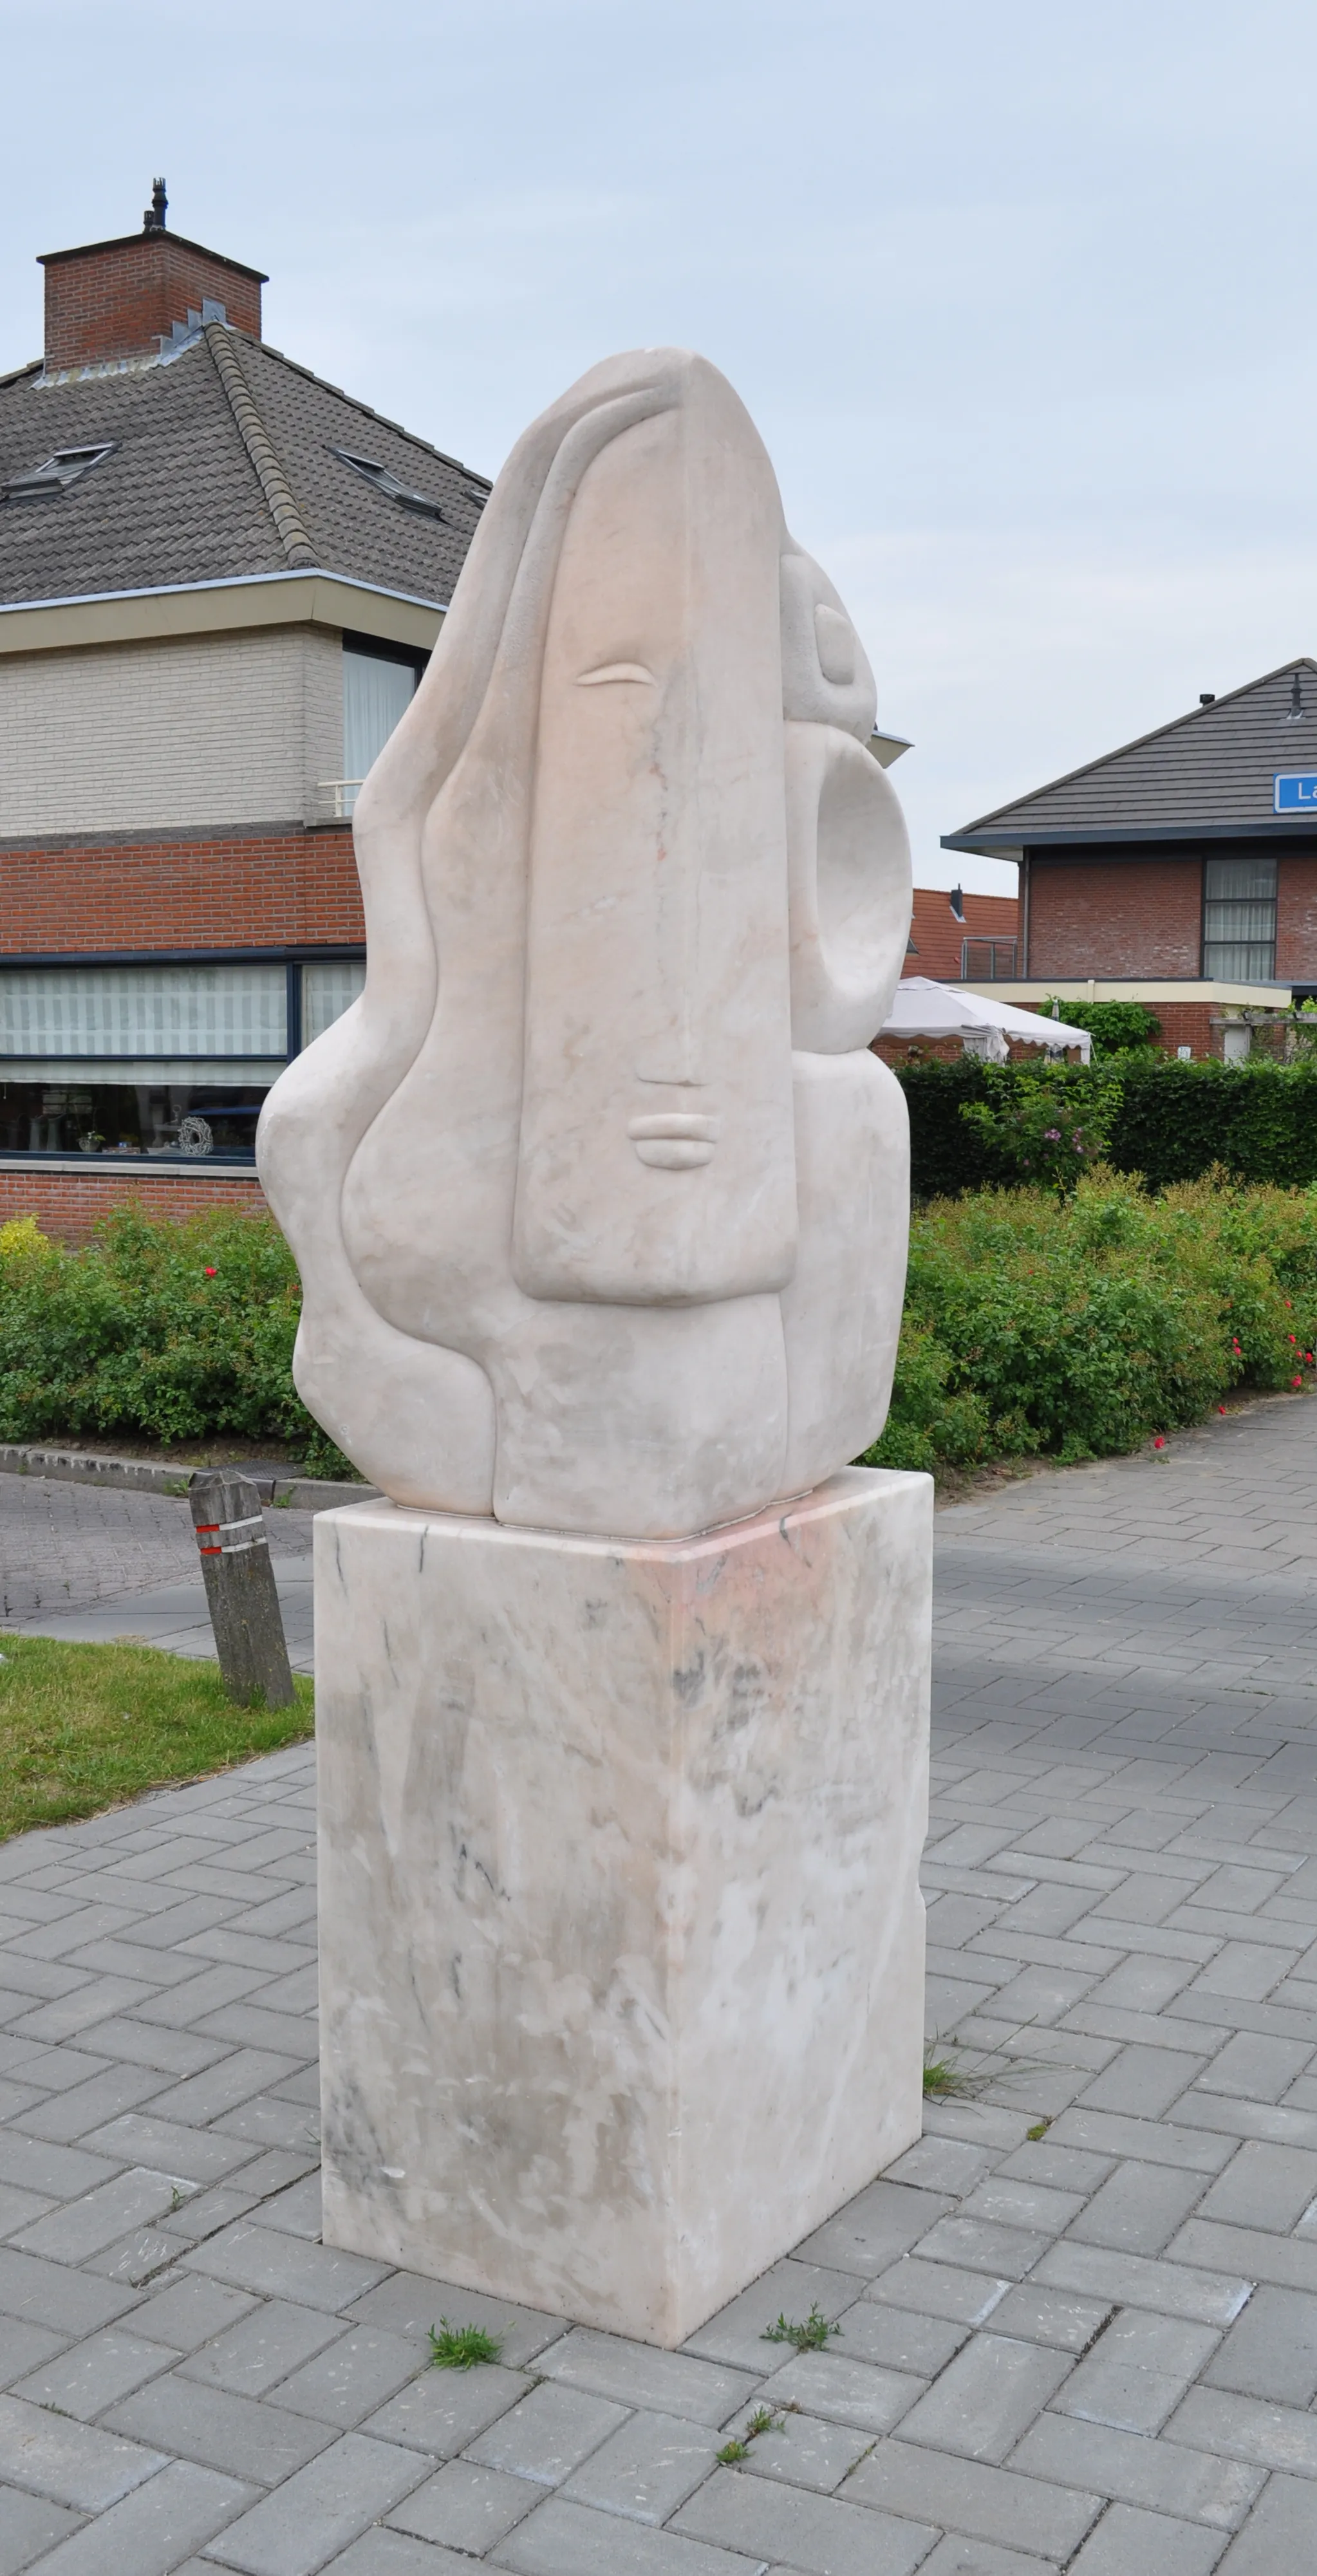 Photo showing: Sculpture "De Wachter", part of three sculptures placed in 2002 along Meteren. Made by Mathieu Nab. This part is placed at the corner of Verlengde Beredestraat/Laan 1940-1945.